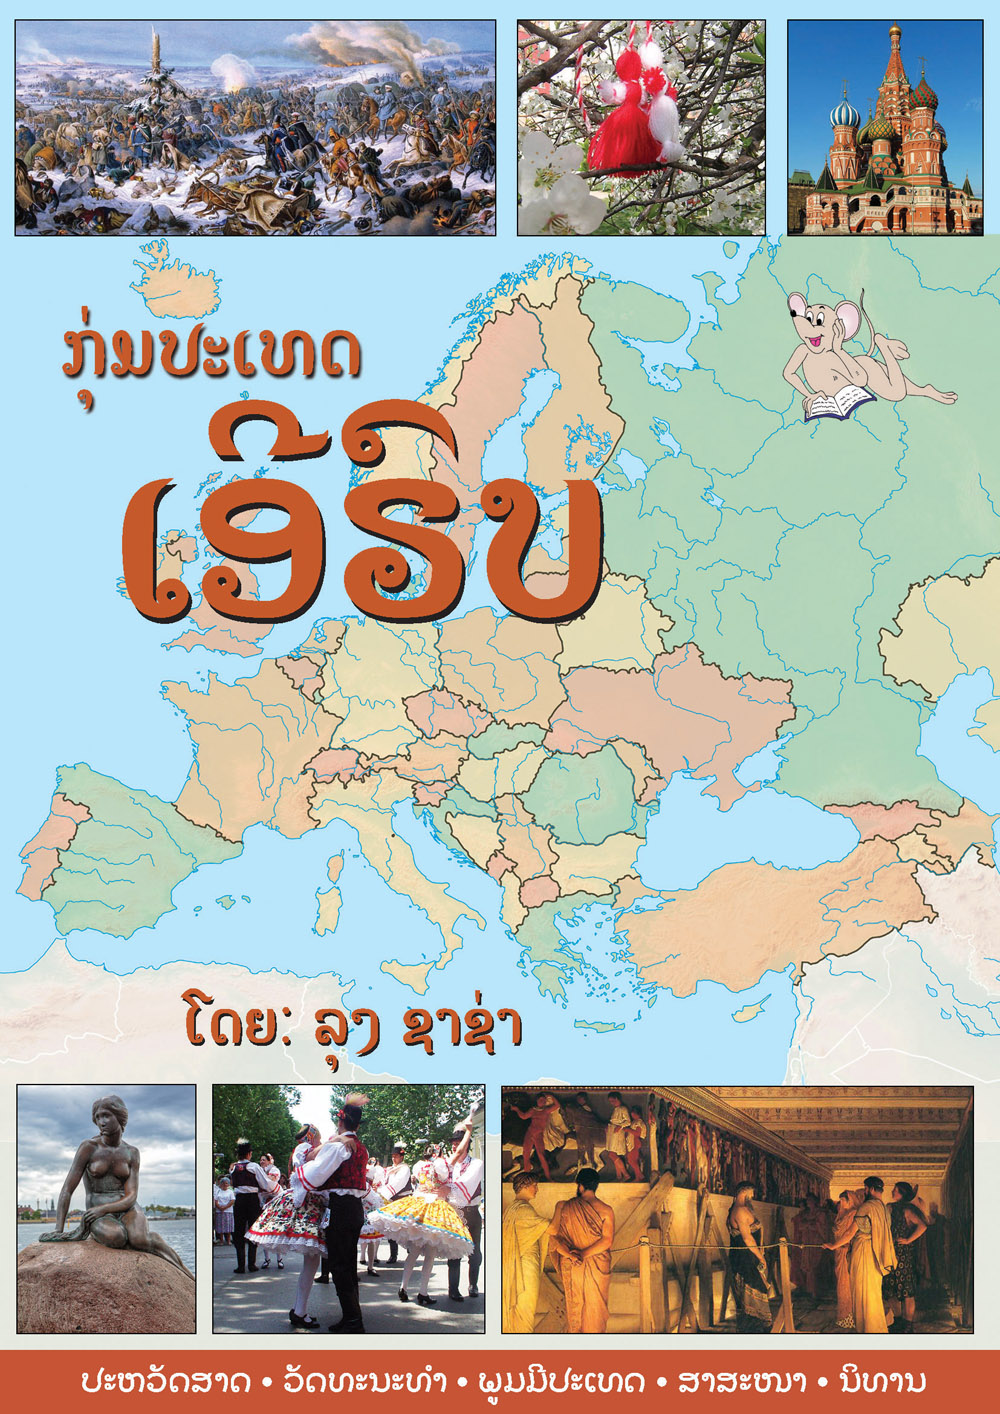 Countries of Europe large book cover, published in Lao language